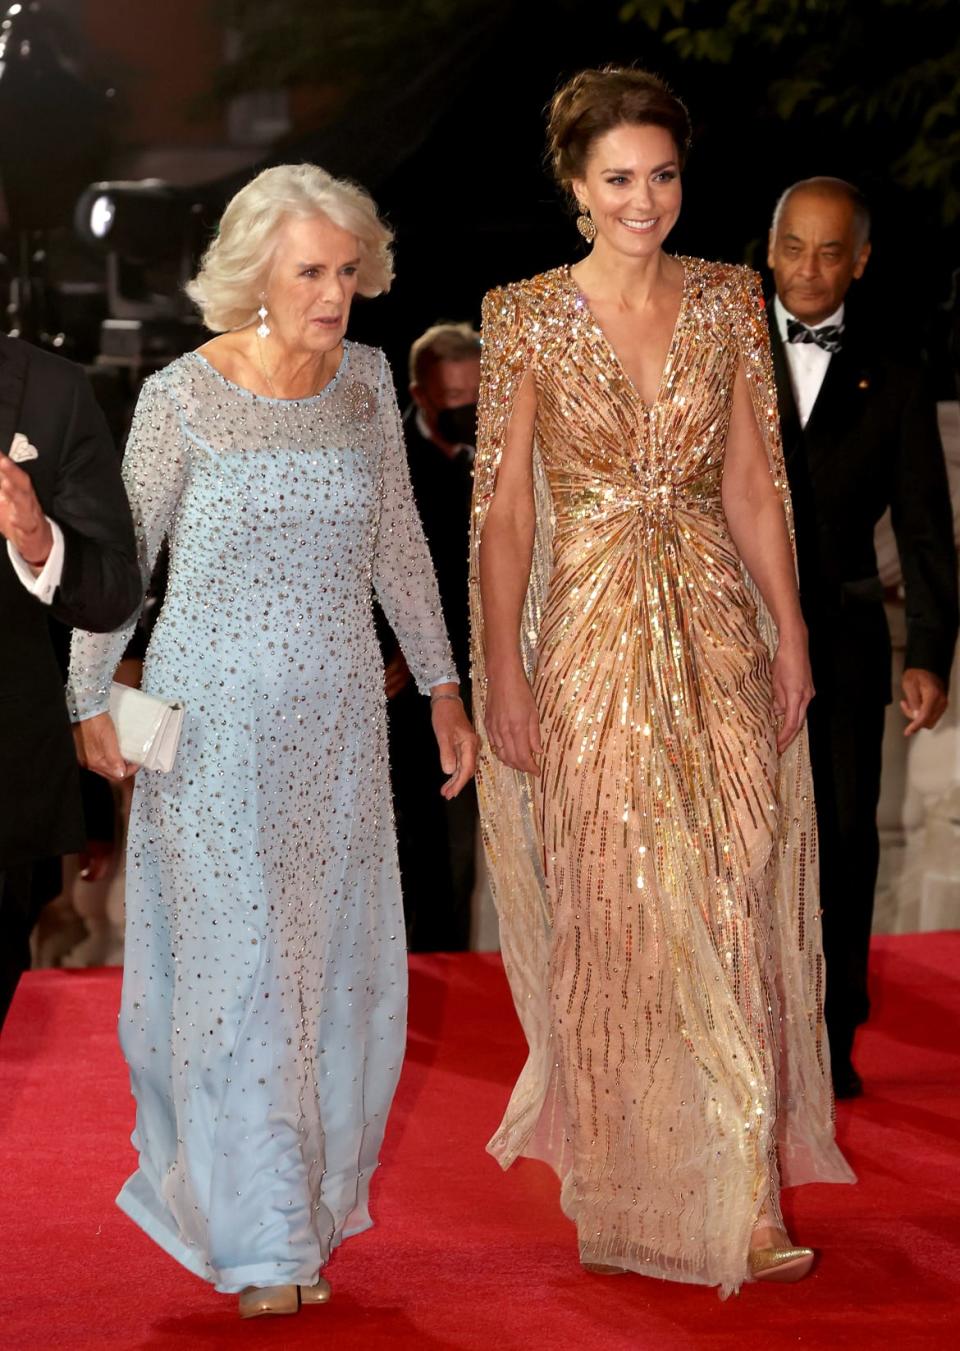 <div class="inline-image__title">1343626443</div> <div class="inline-image__caption"><p>Catherine, Duchess of Cambridge, and Camilla, Duchess of Cornwall, attend the "No Time To Die" World Premiere at Royal Albert Hall on September 28, 2021 in London, England.</p></div> <div class="inline-image__credit">Chris Jackson/Getty Images</div>